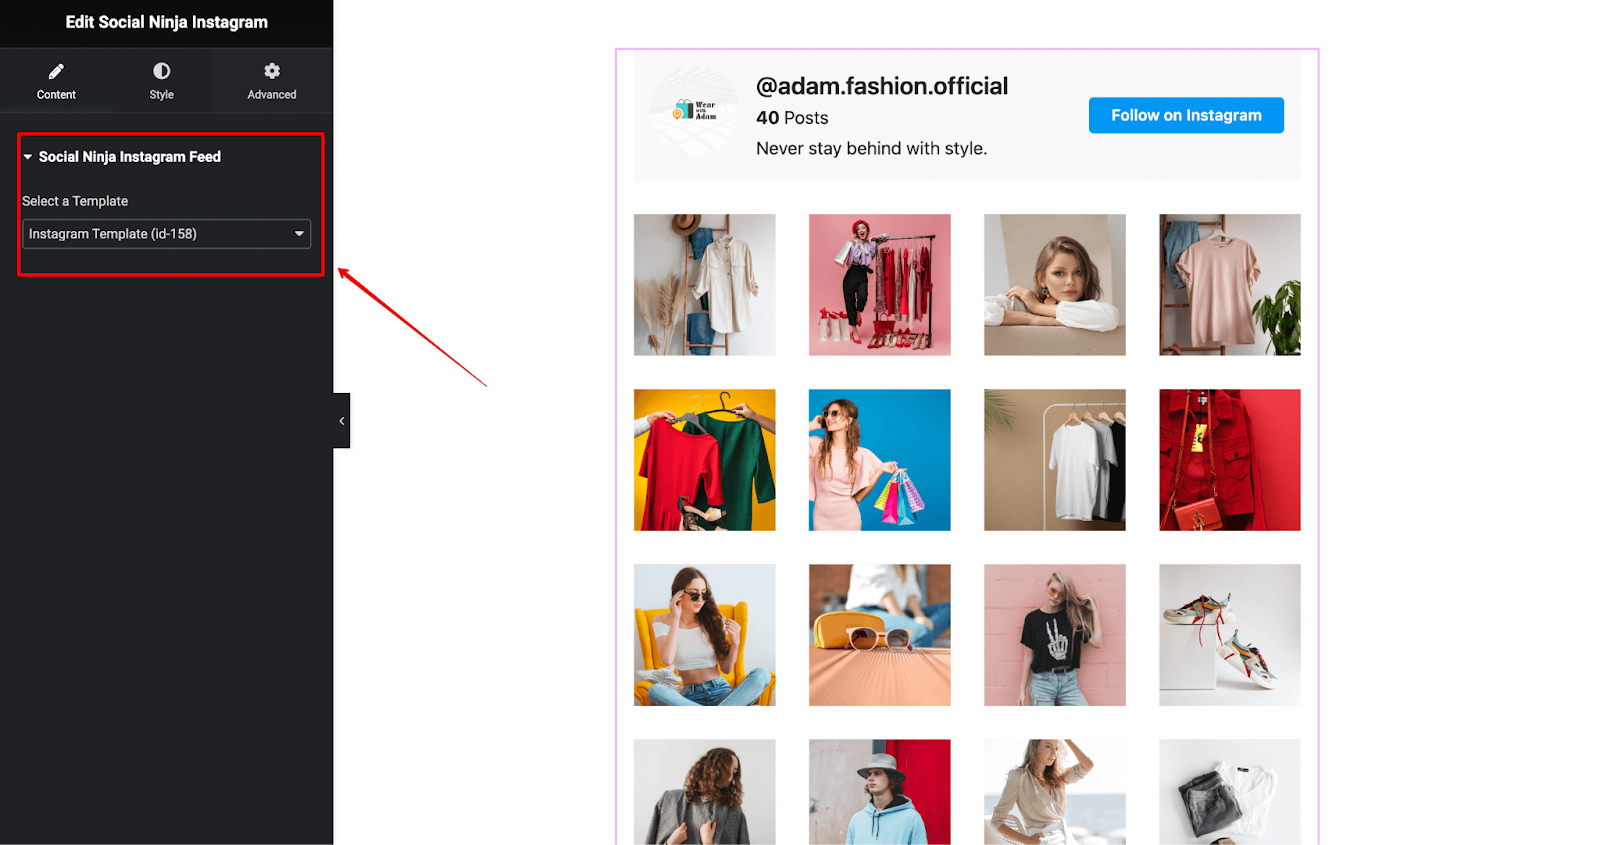 Selecting template for integration of the pre-custom Instagram template.